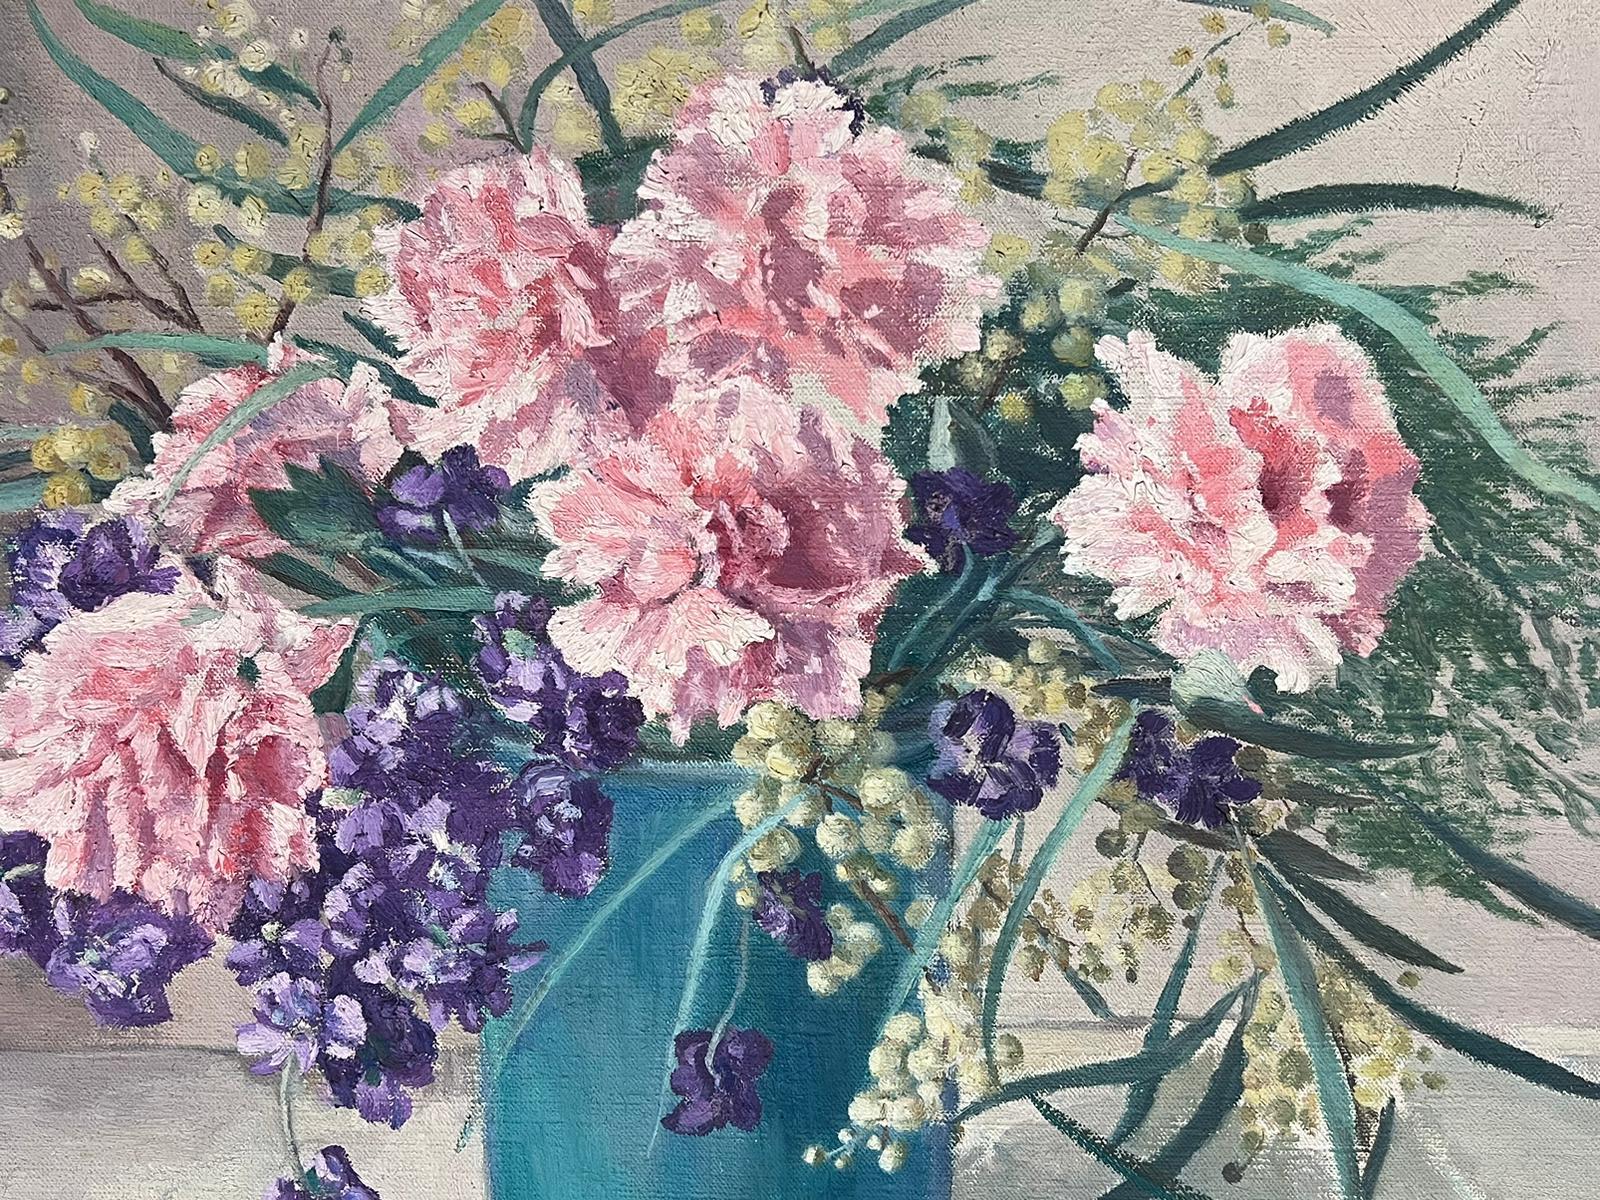 Pink Flowers Still Life
French impressionist artist, mid 20th century
signed oil on canvas, unframed
canvas: 18 x 21.5 inches
provenance: private collection, France
condition: a few minor scuffs but overall good and sound condition 